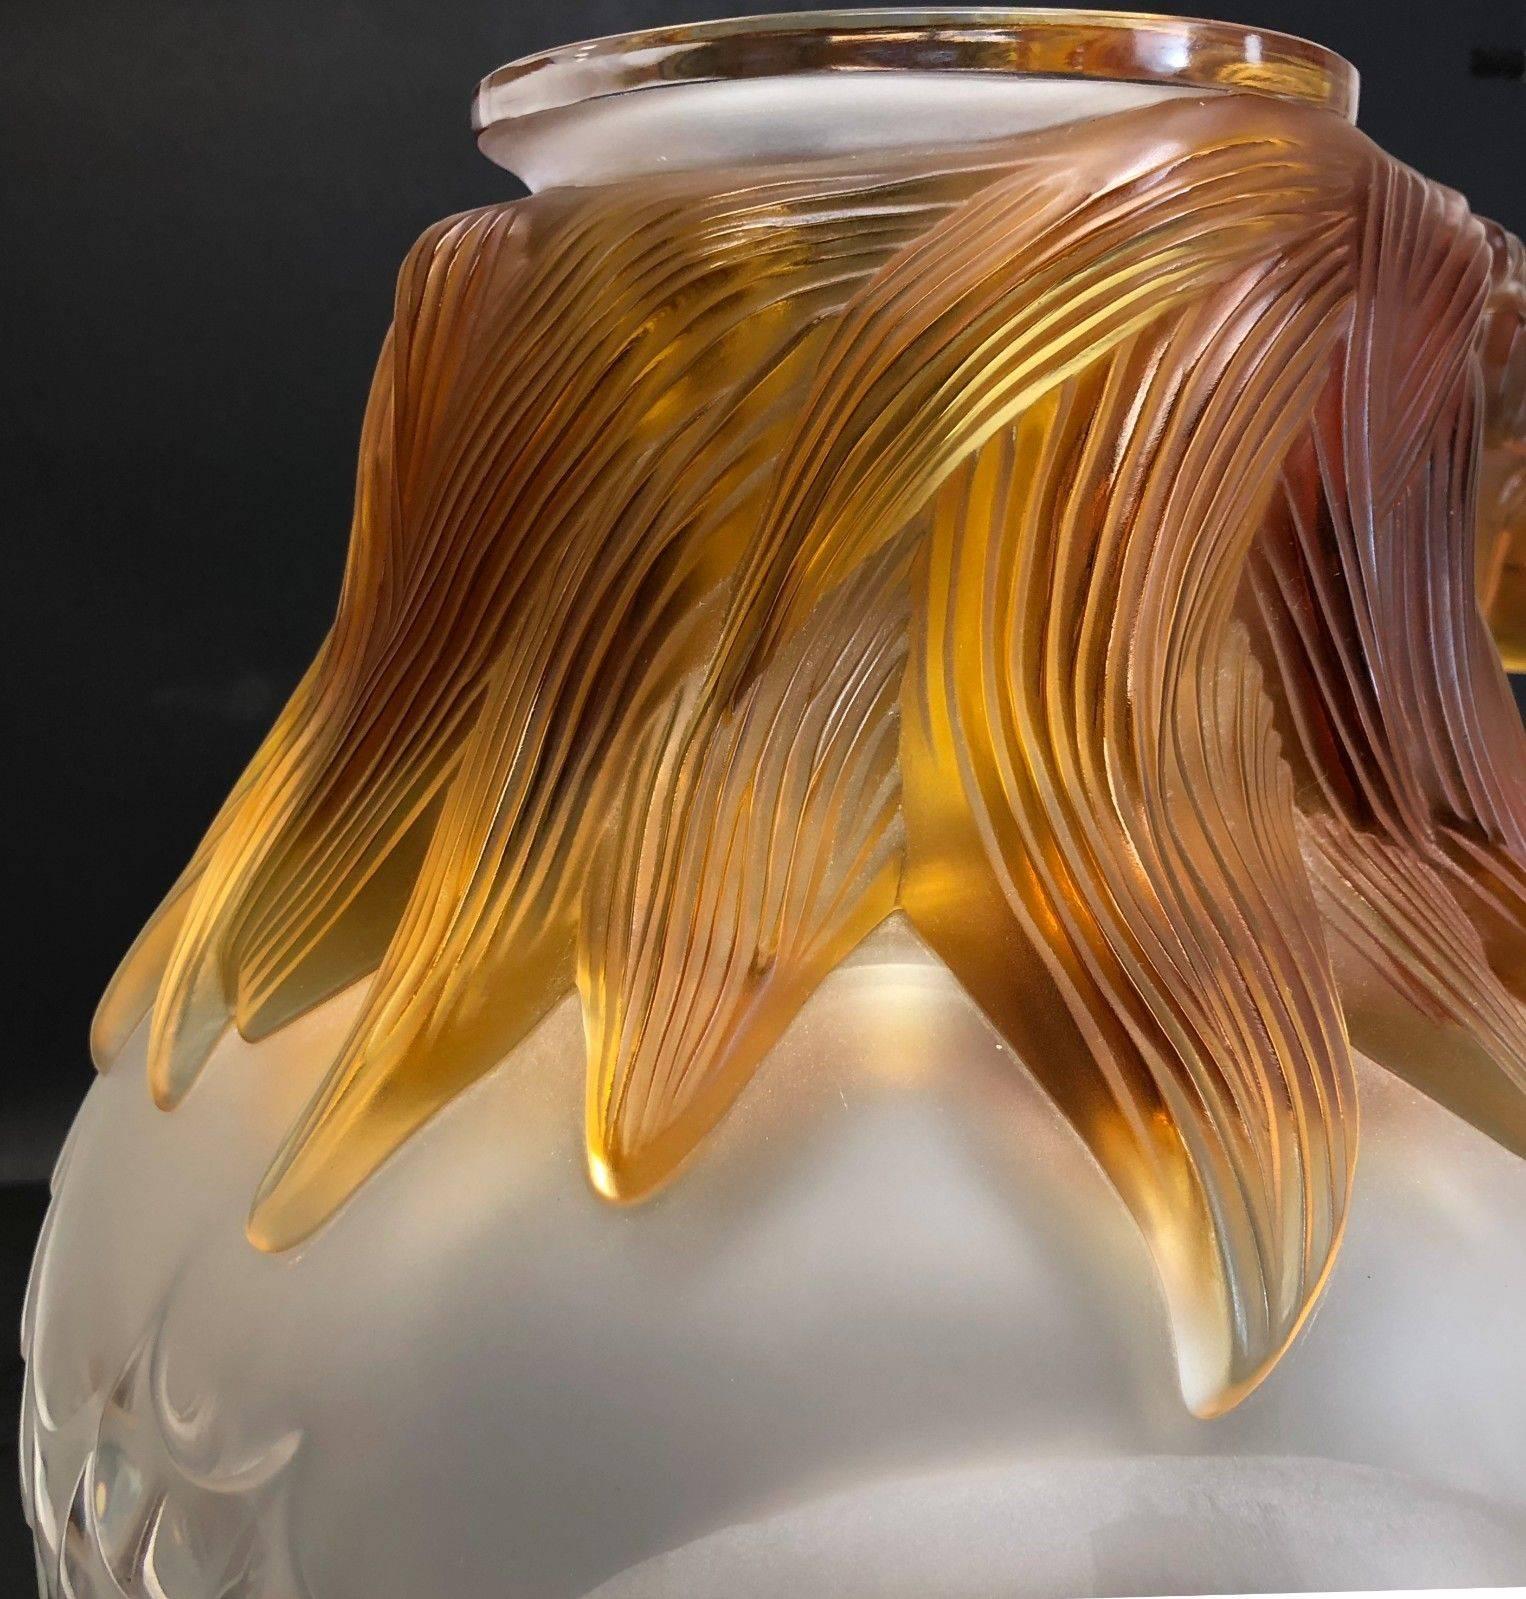 20th Century Magnificent Lalique Frosted Crystal Amp Amber Vase Imperial Dragon Ltd Ed of 99 For Sale